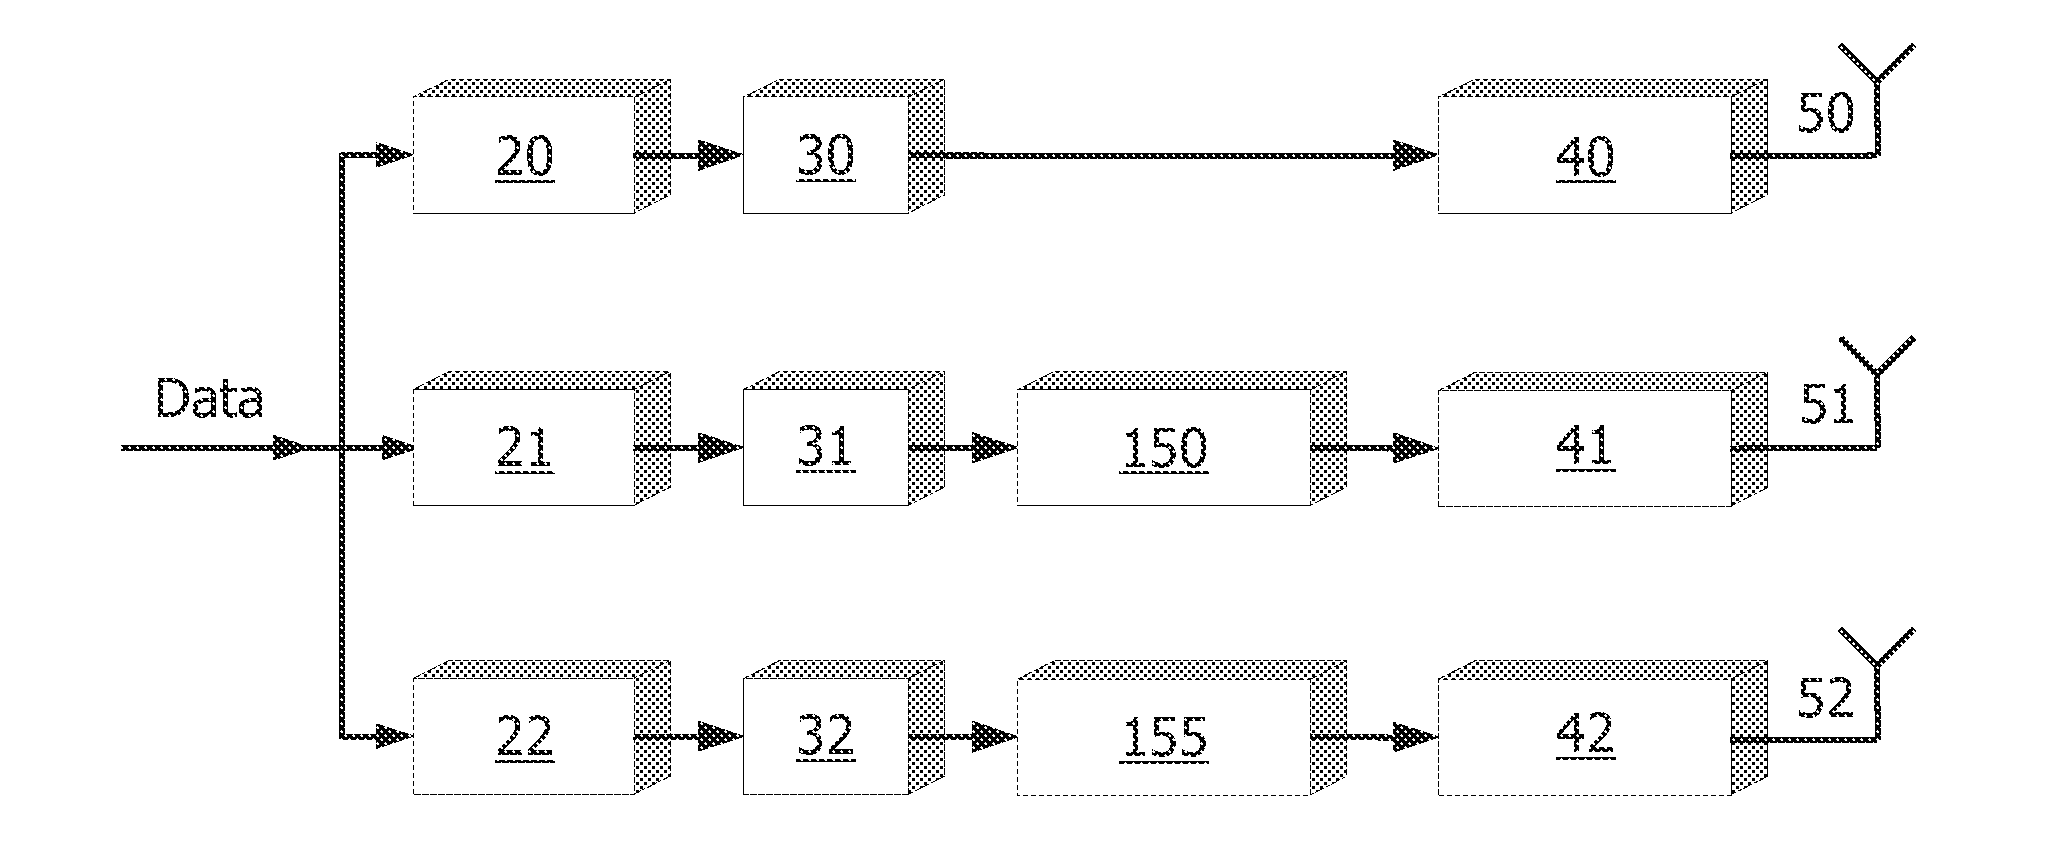 Multiple antenna transmission with variable diversity gain